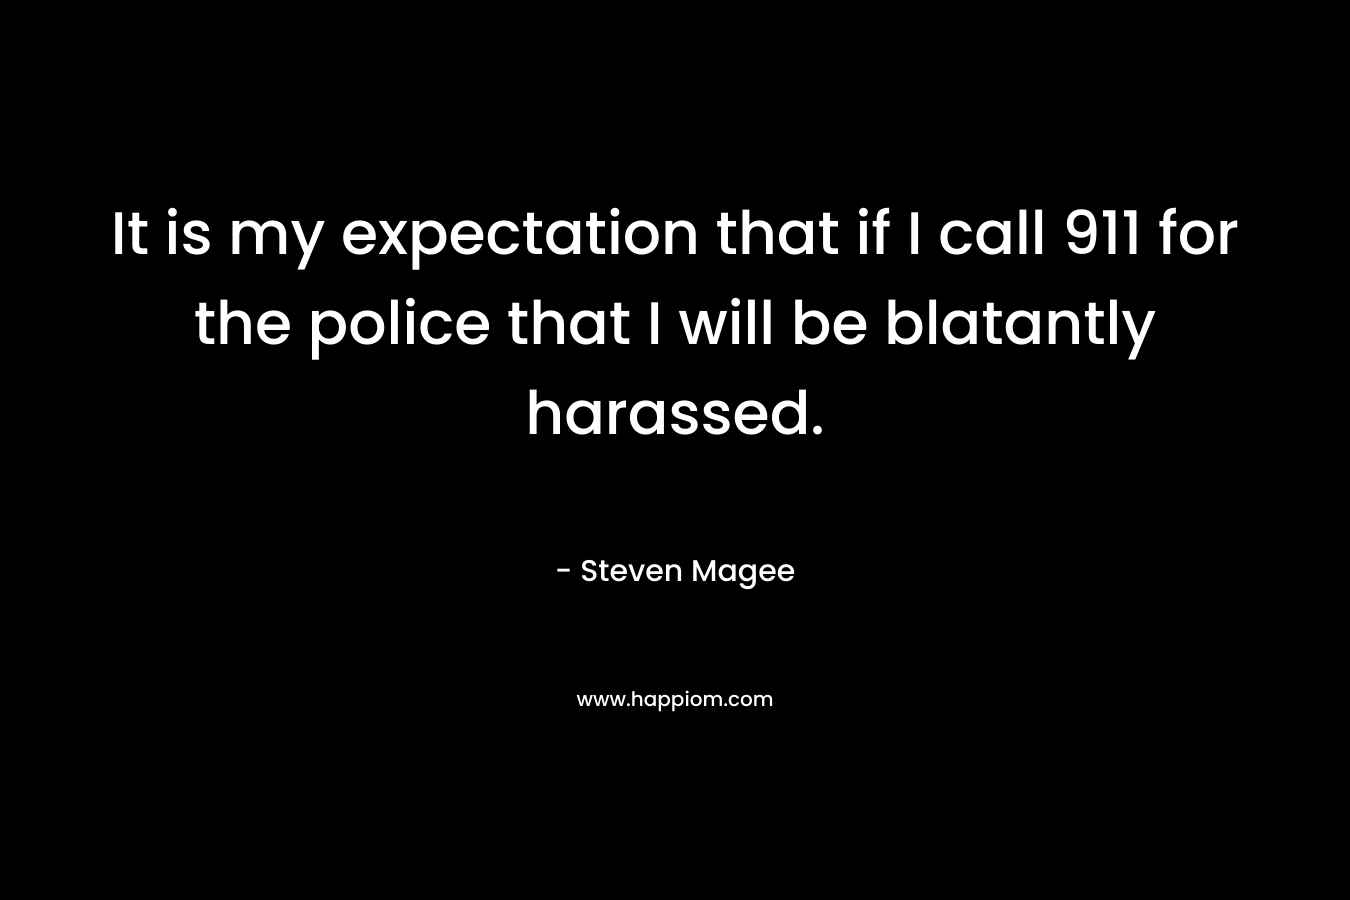 It is my expectation that if I call 911 for the police that I will be blatantly harassed. – Steven Magee